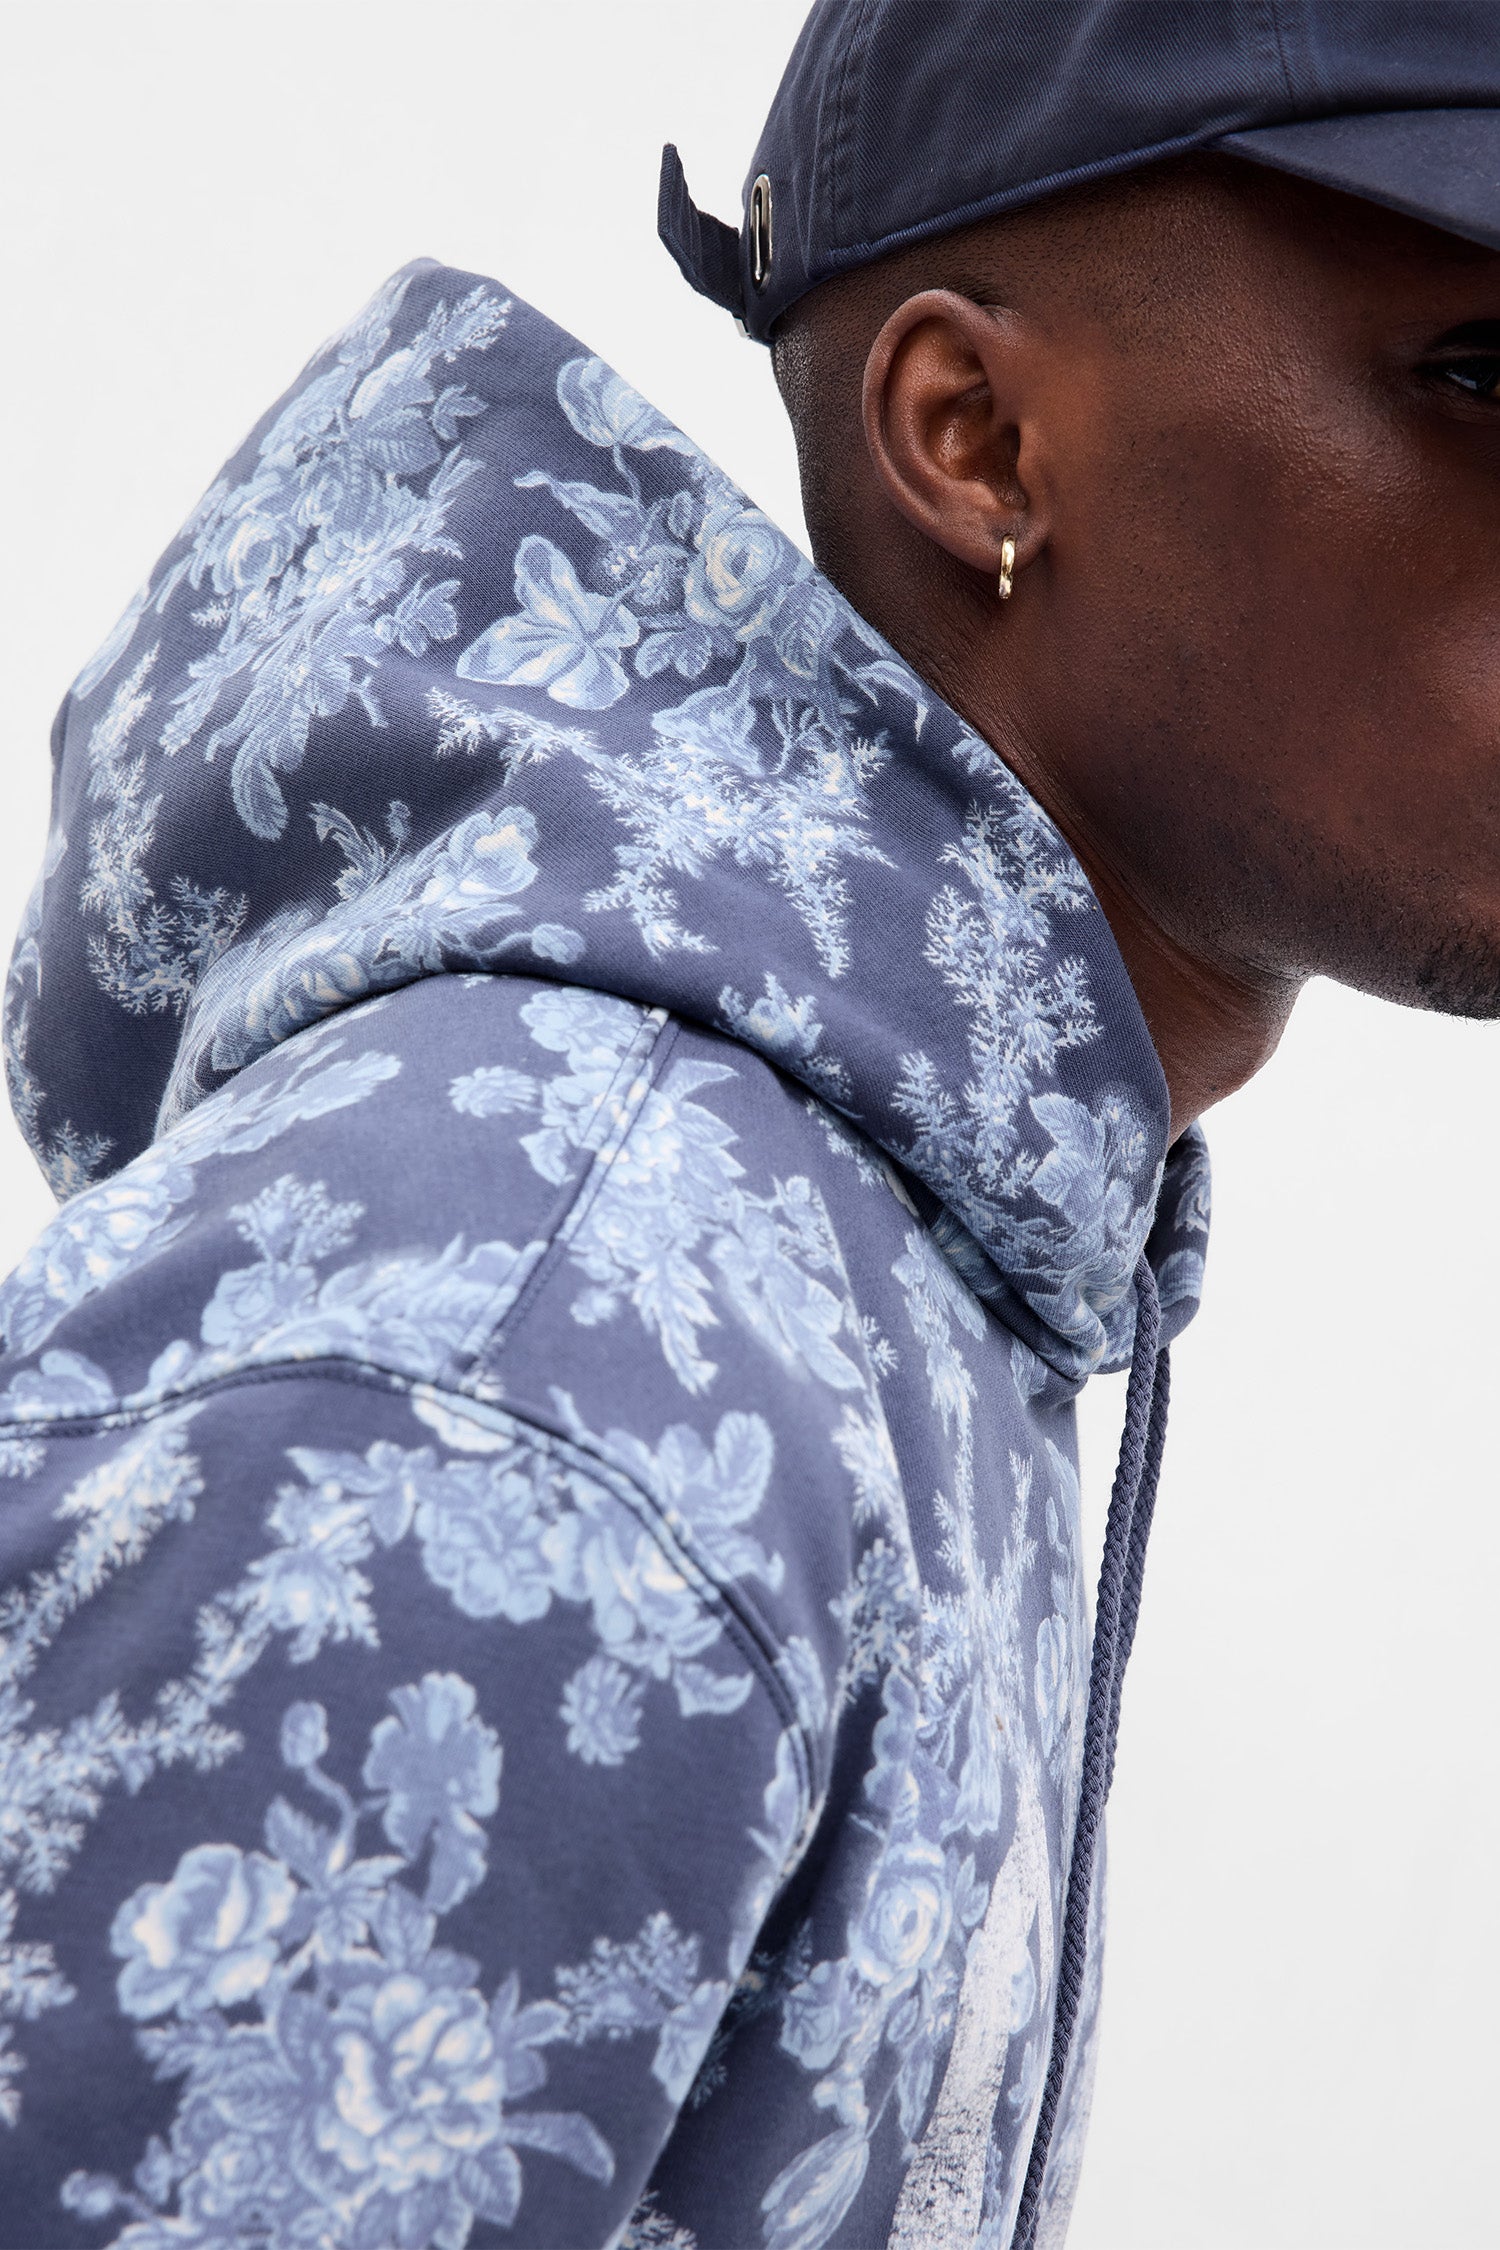 Close up image detailing blue floral pattern and hood on men's hoodie